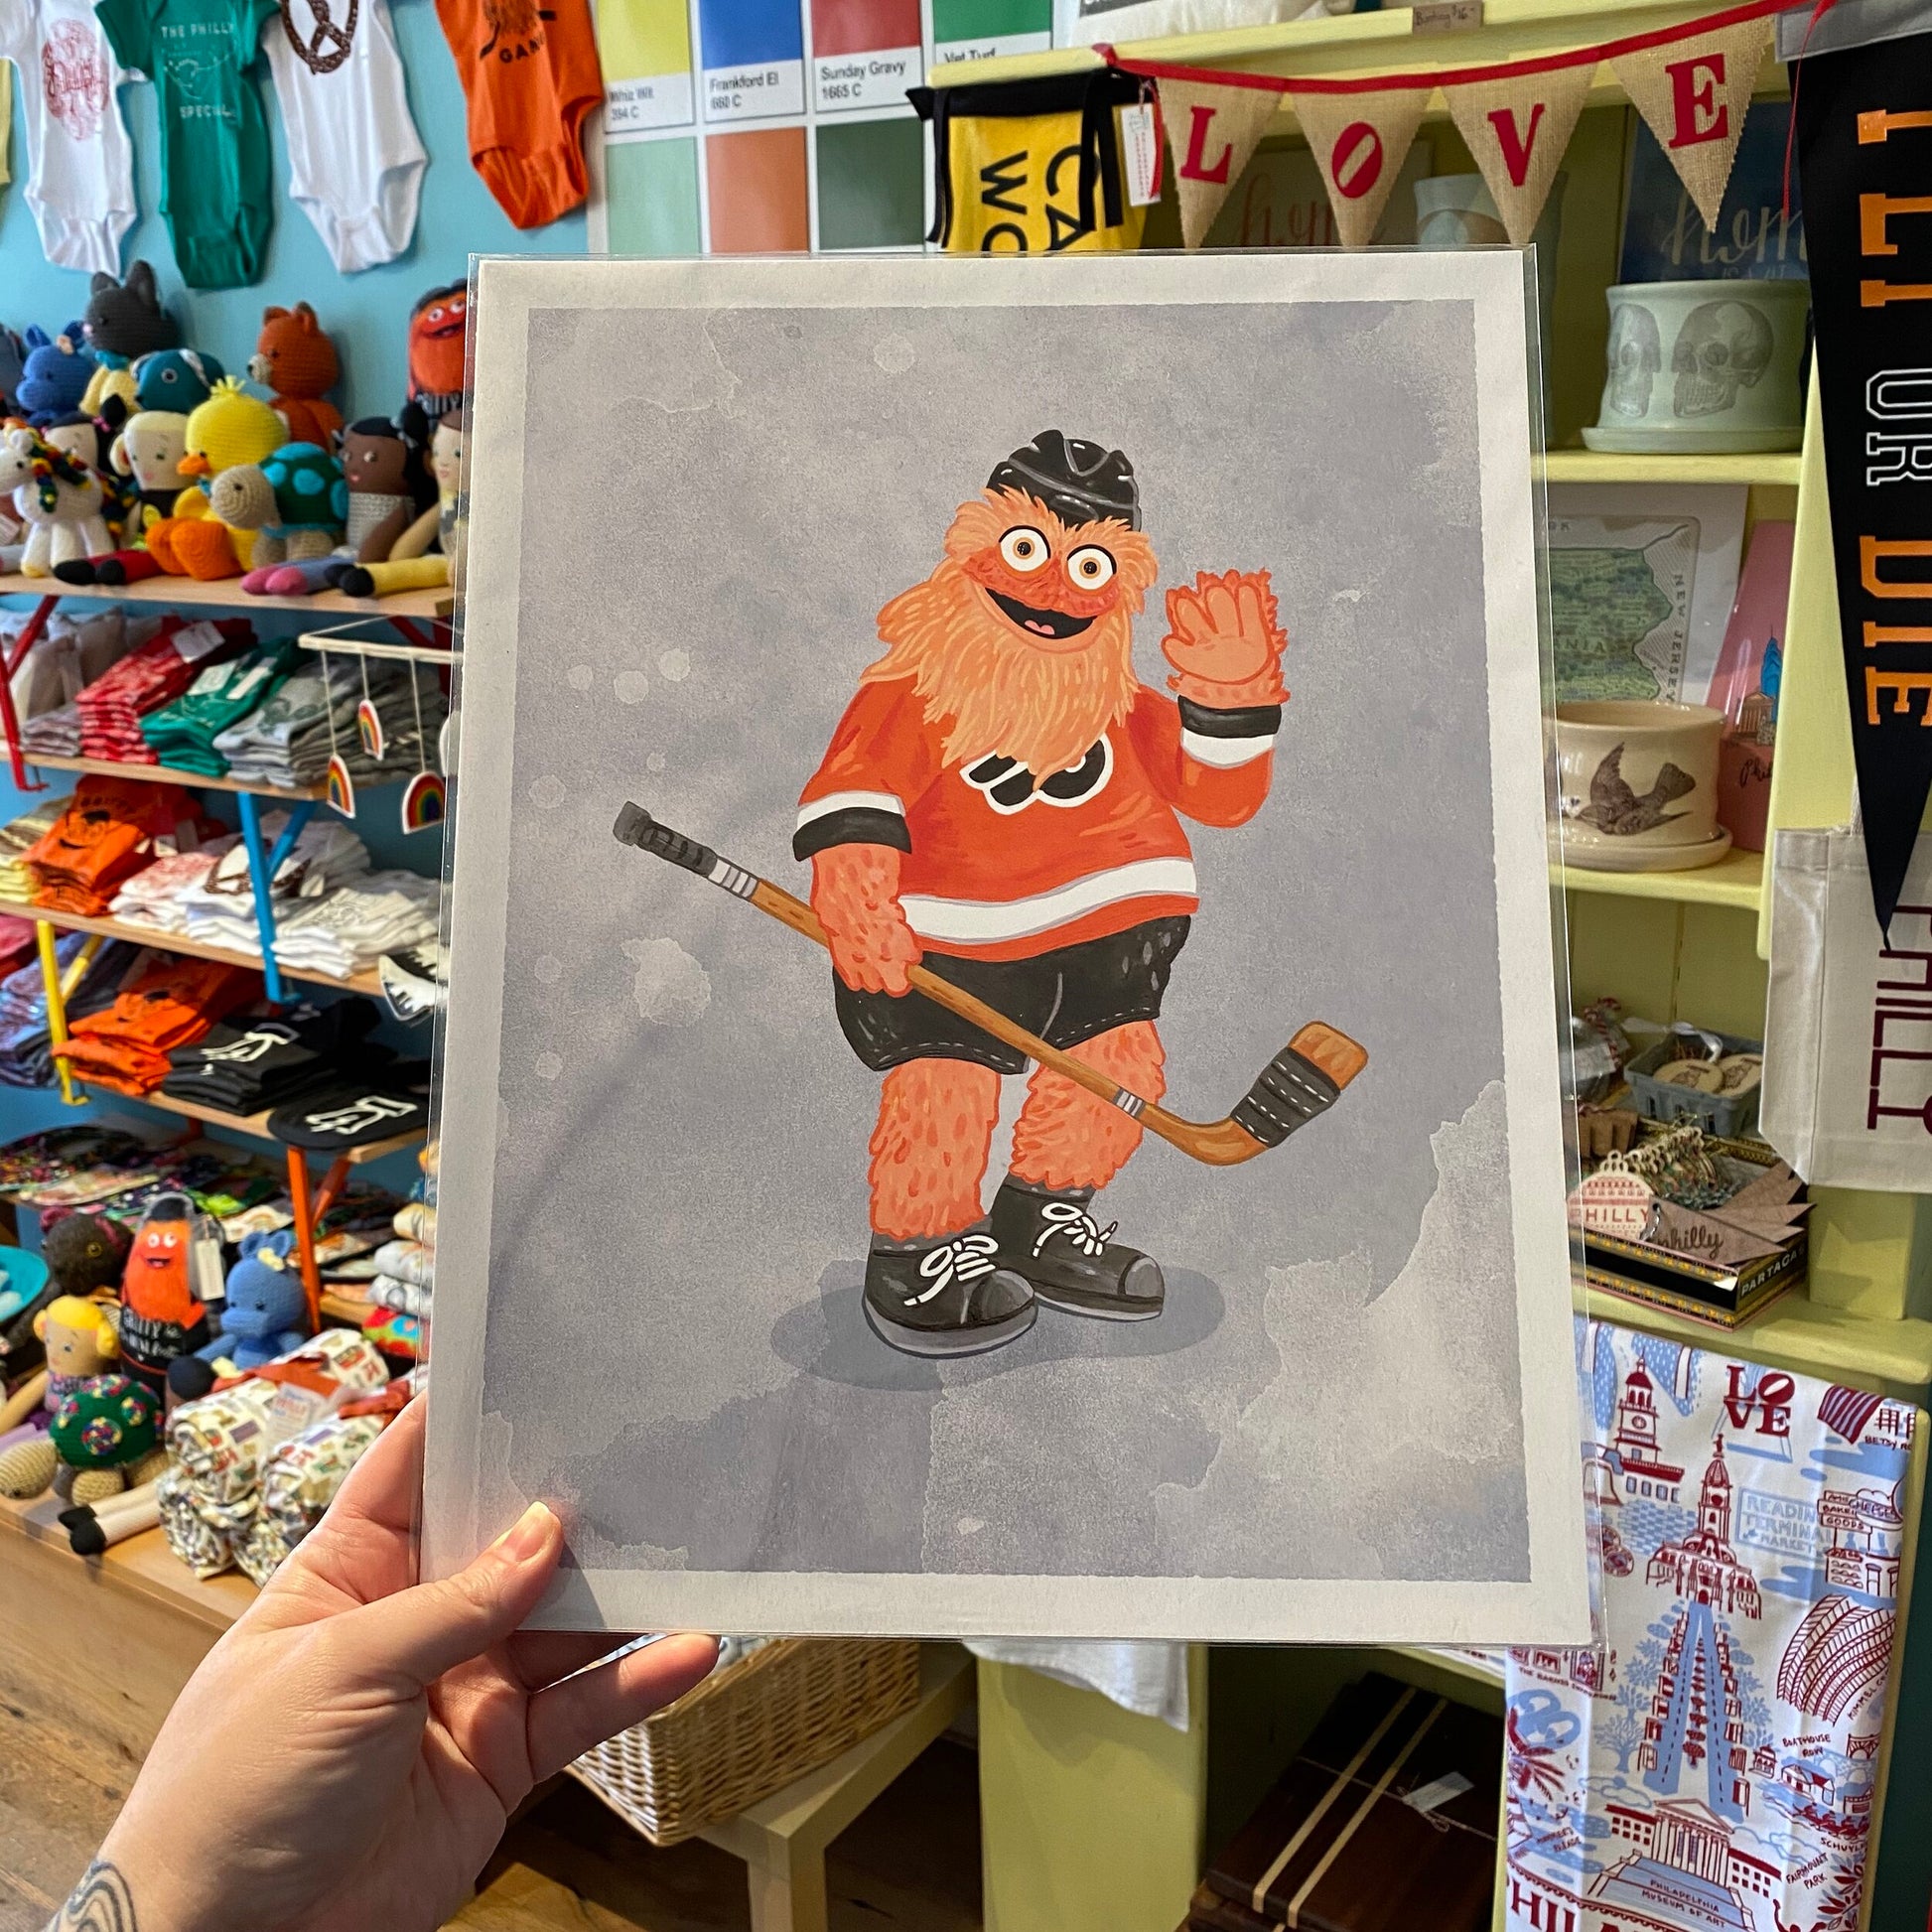 Illustration of a cartoon hockey player with orange fur, holding a hockey stick, presented on Philly Mascot Prints by Jamie Bendas.